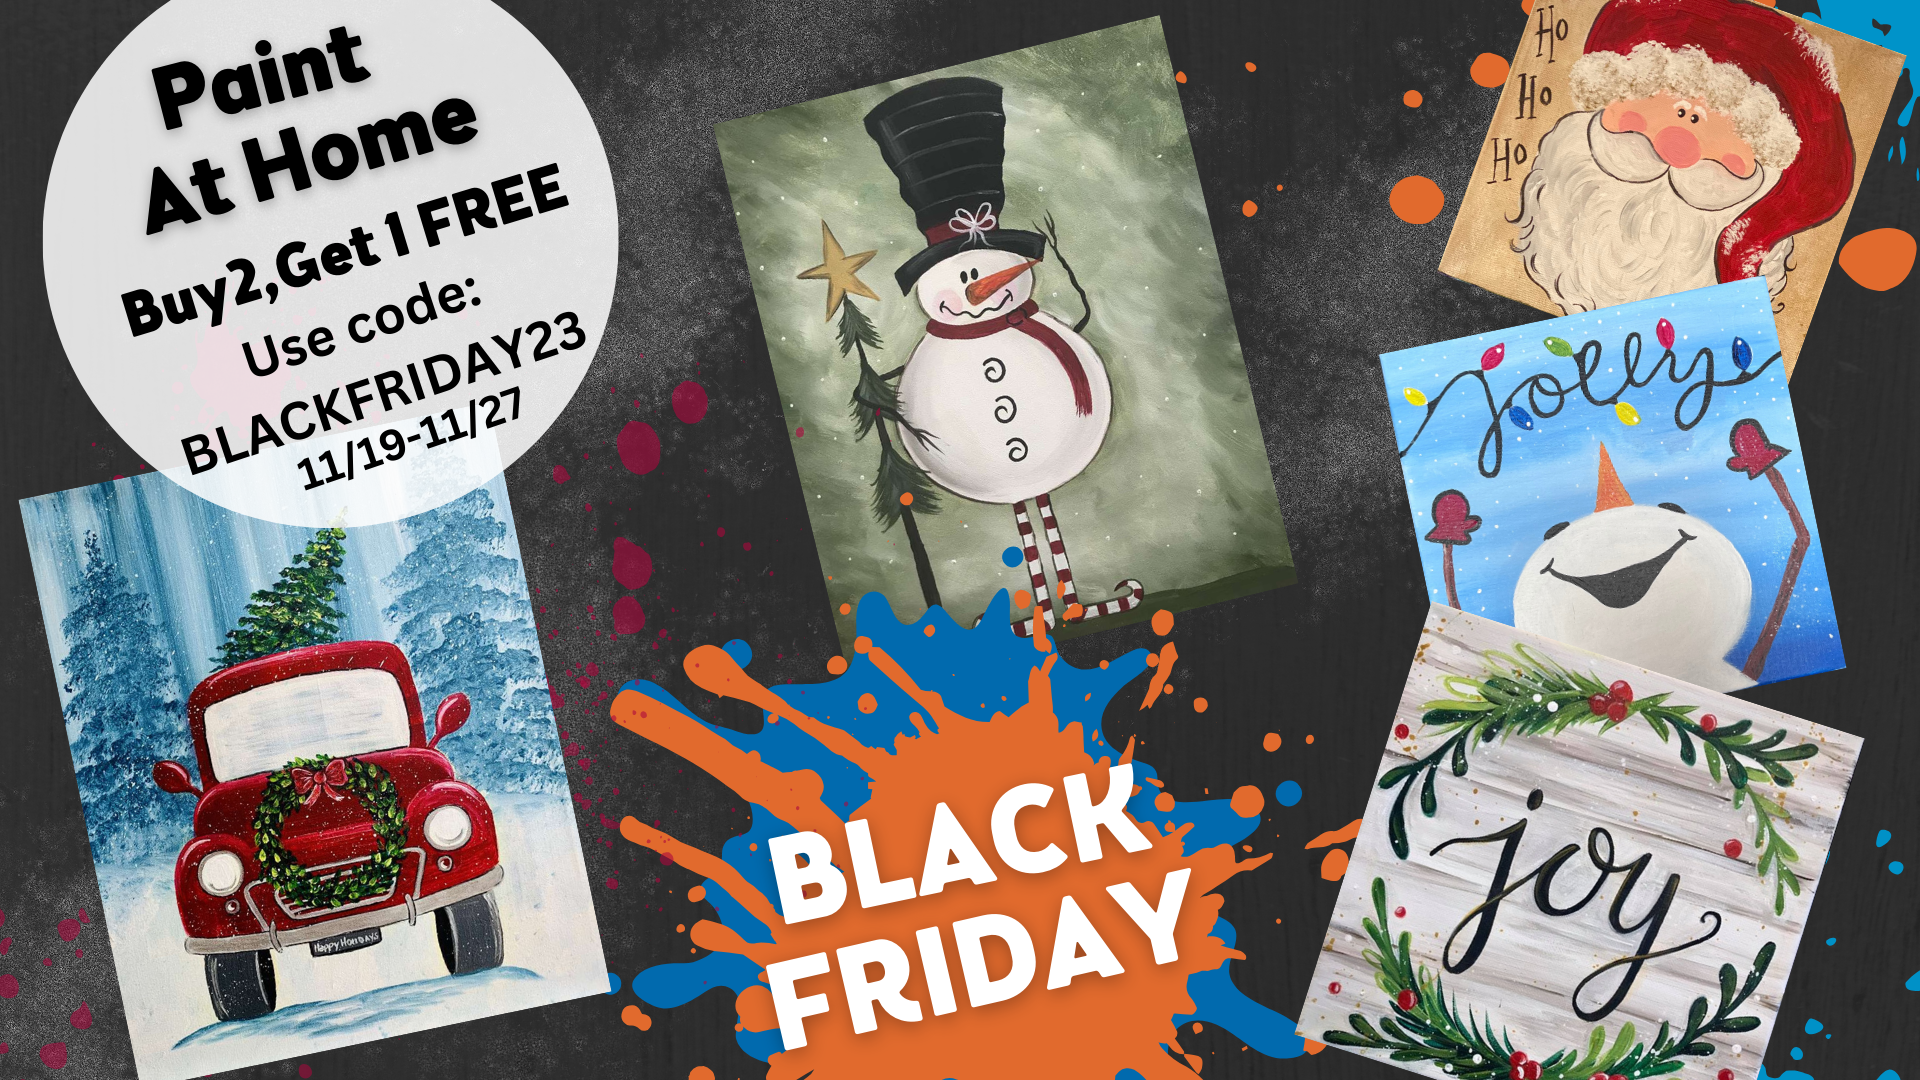 Black Friday Paint At Home Promo